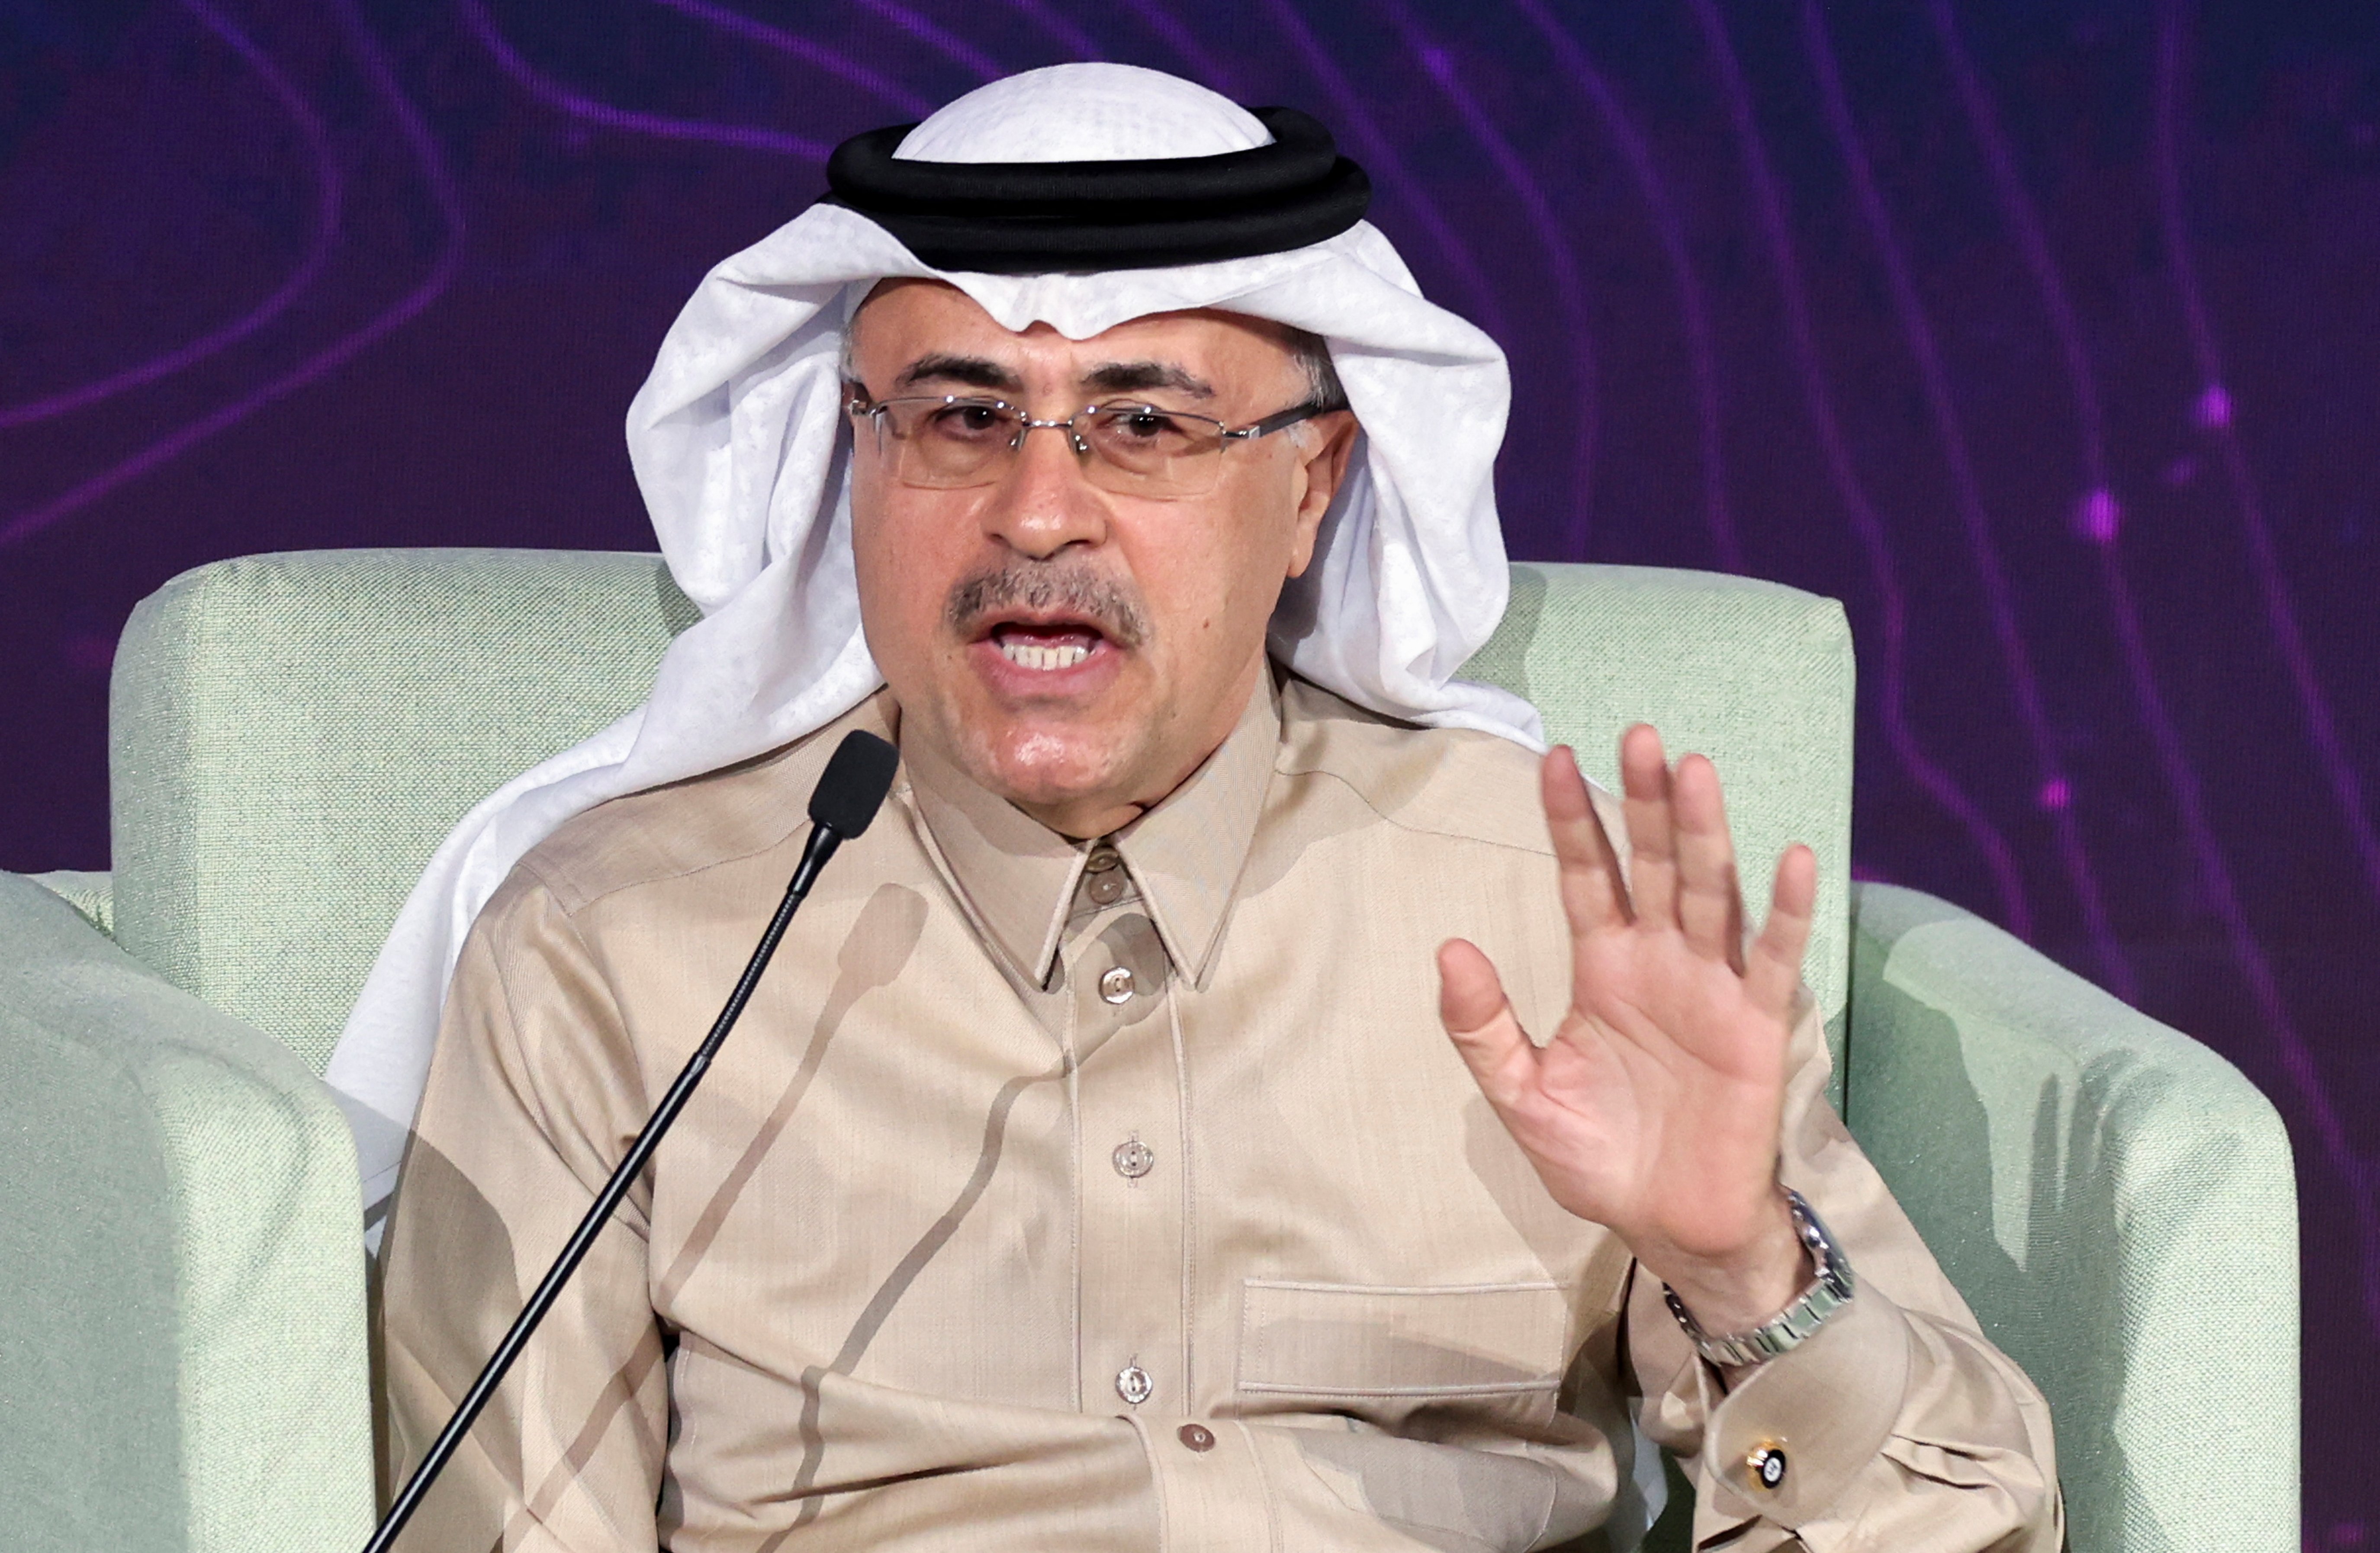 President and CEO of Saudi's Aramco, Amin H Nasser, speaks during the opening session of the International Petroleum Technology Conference (IPTC), in Riyadh, Saudi Arabia